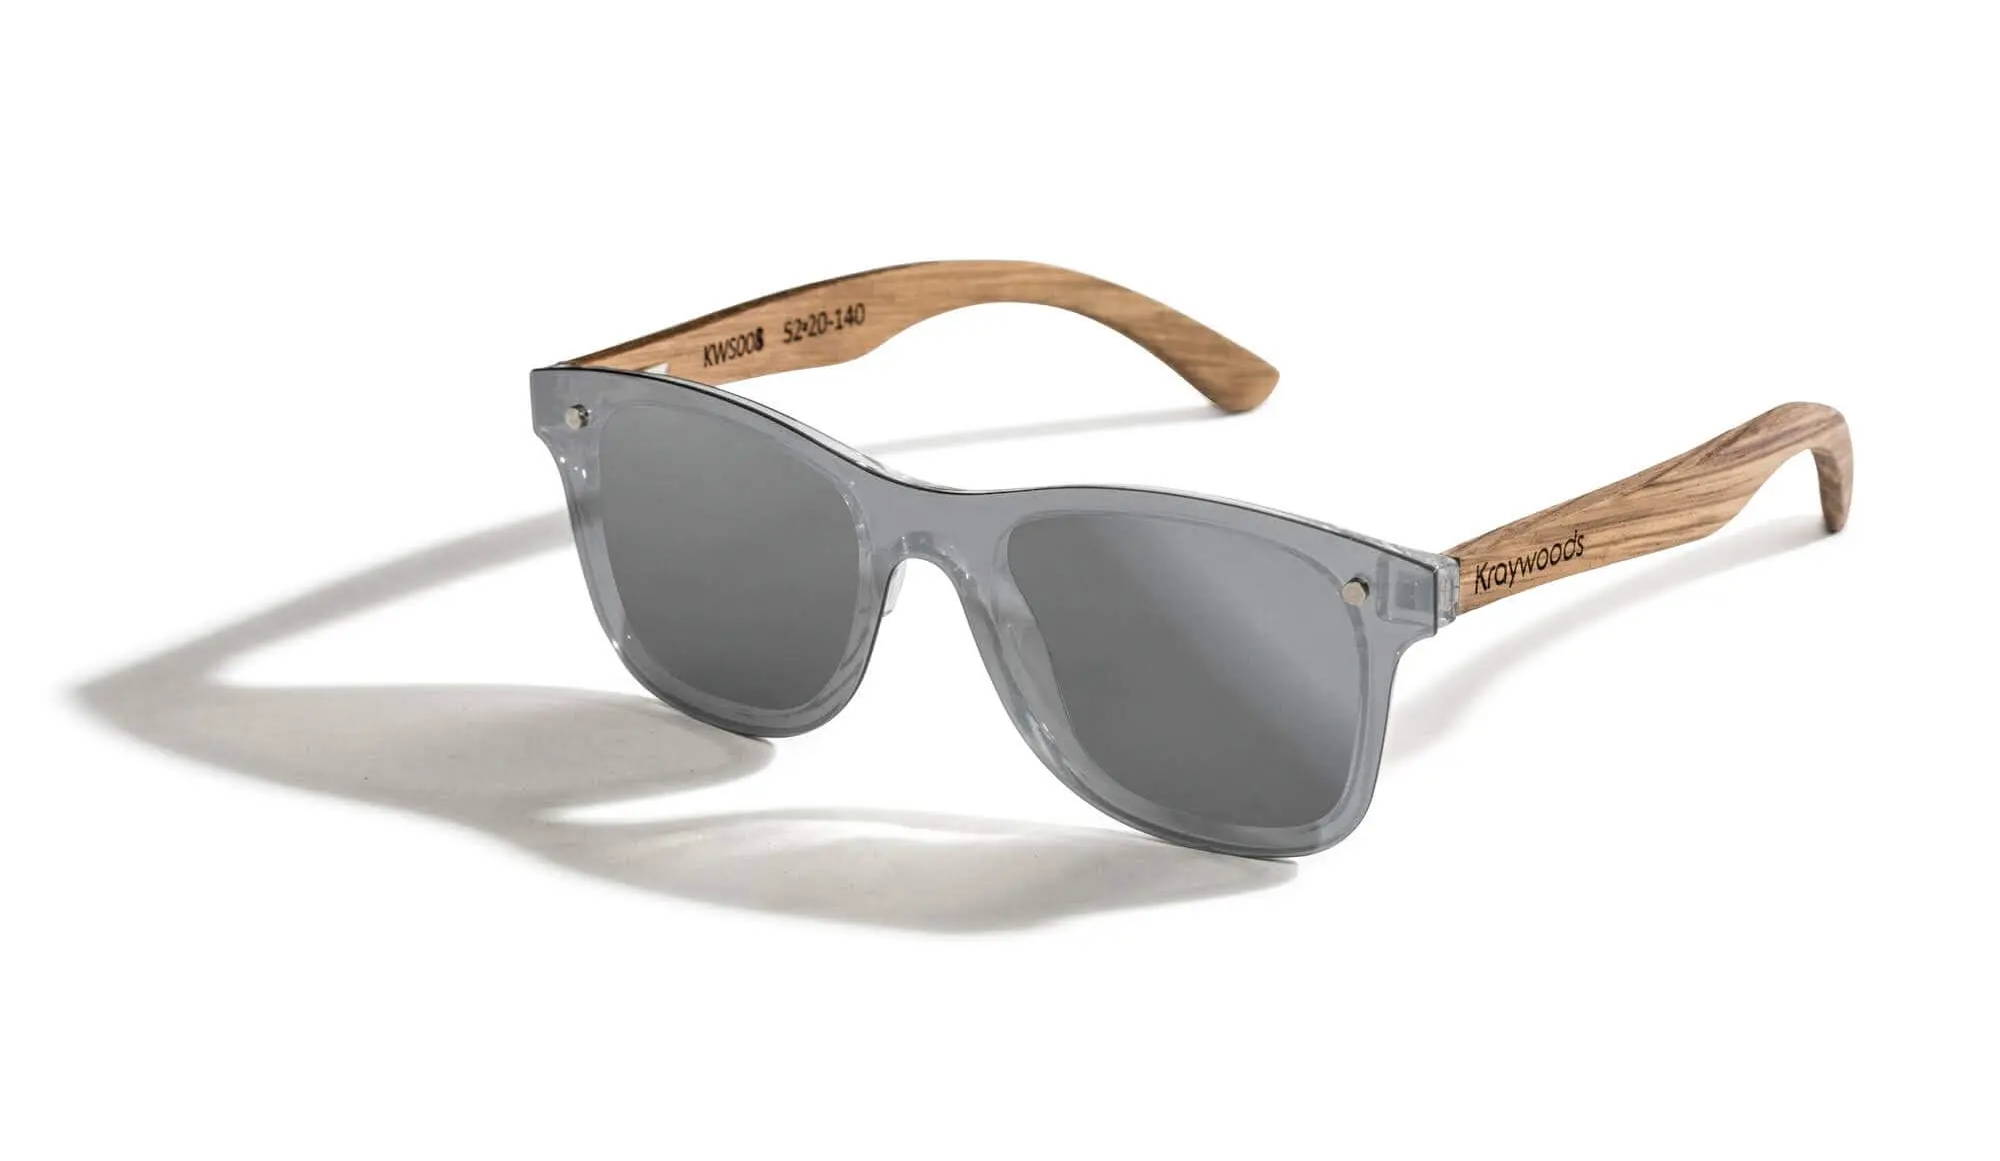 Rover, Mirror Lens Wood Sunglasses with Zebra Wood temples